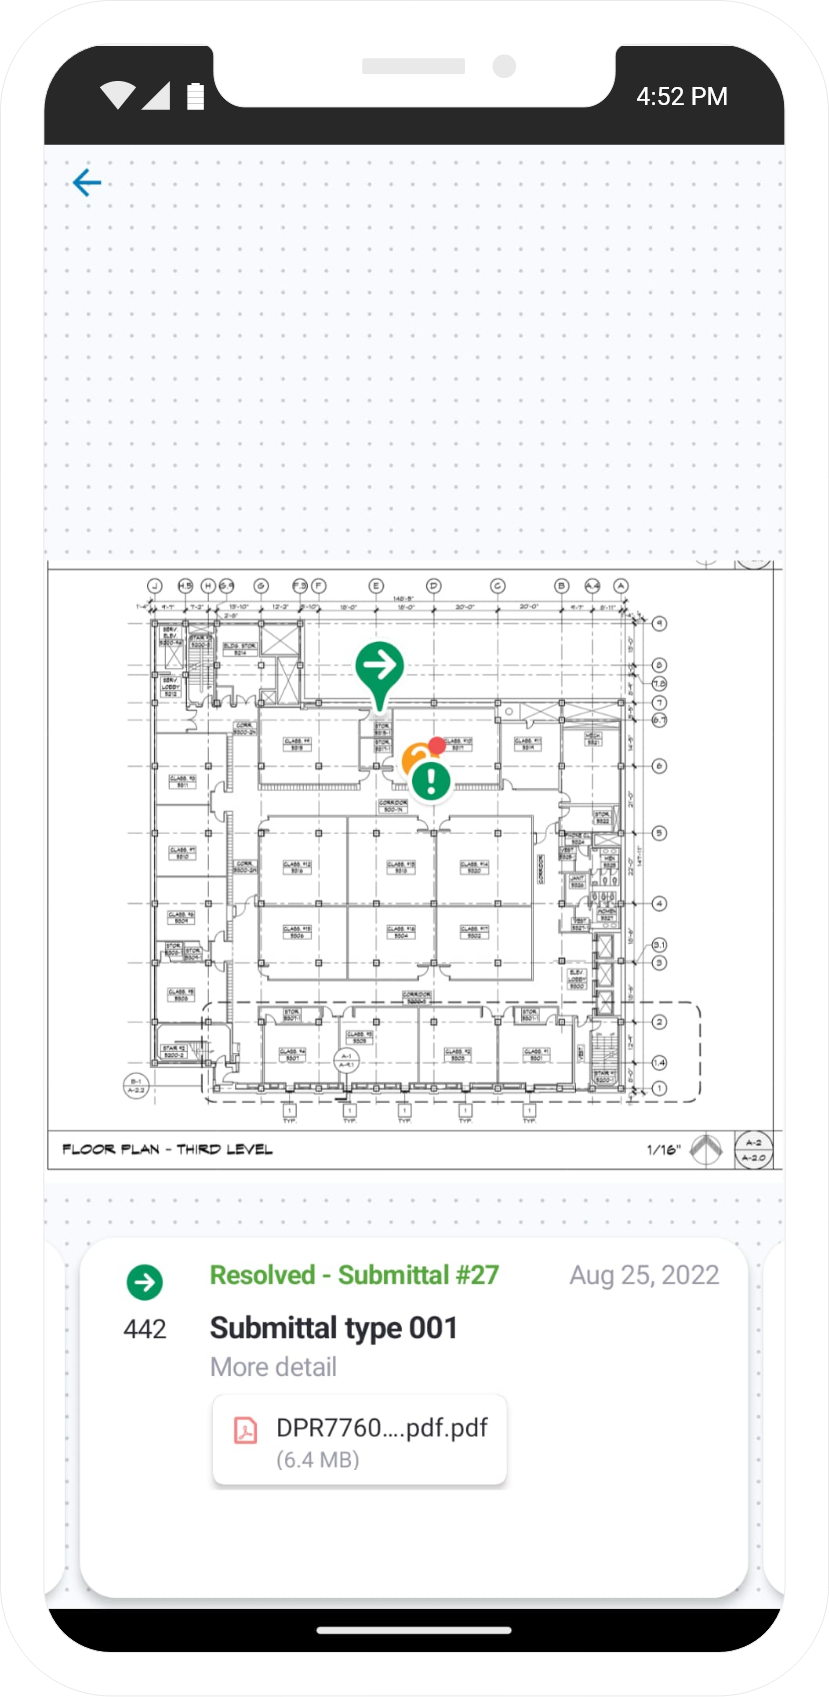 Plan View on mobile app